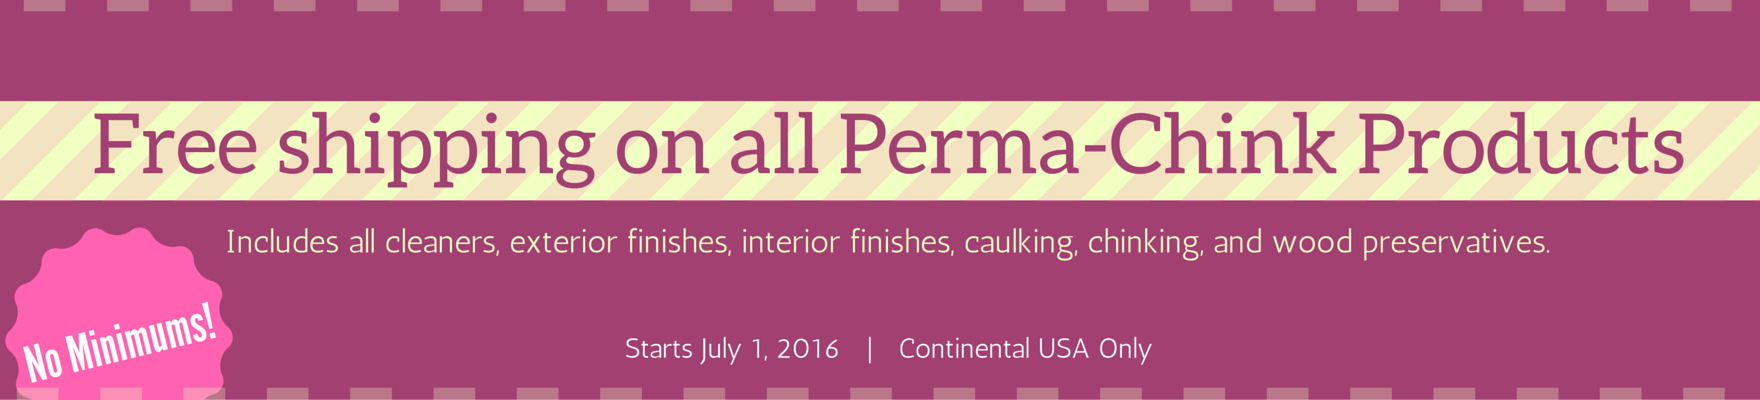 Free shipping on all Perma-Chink Products